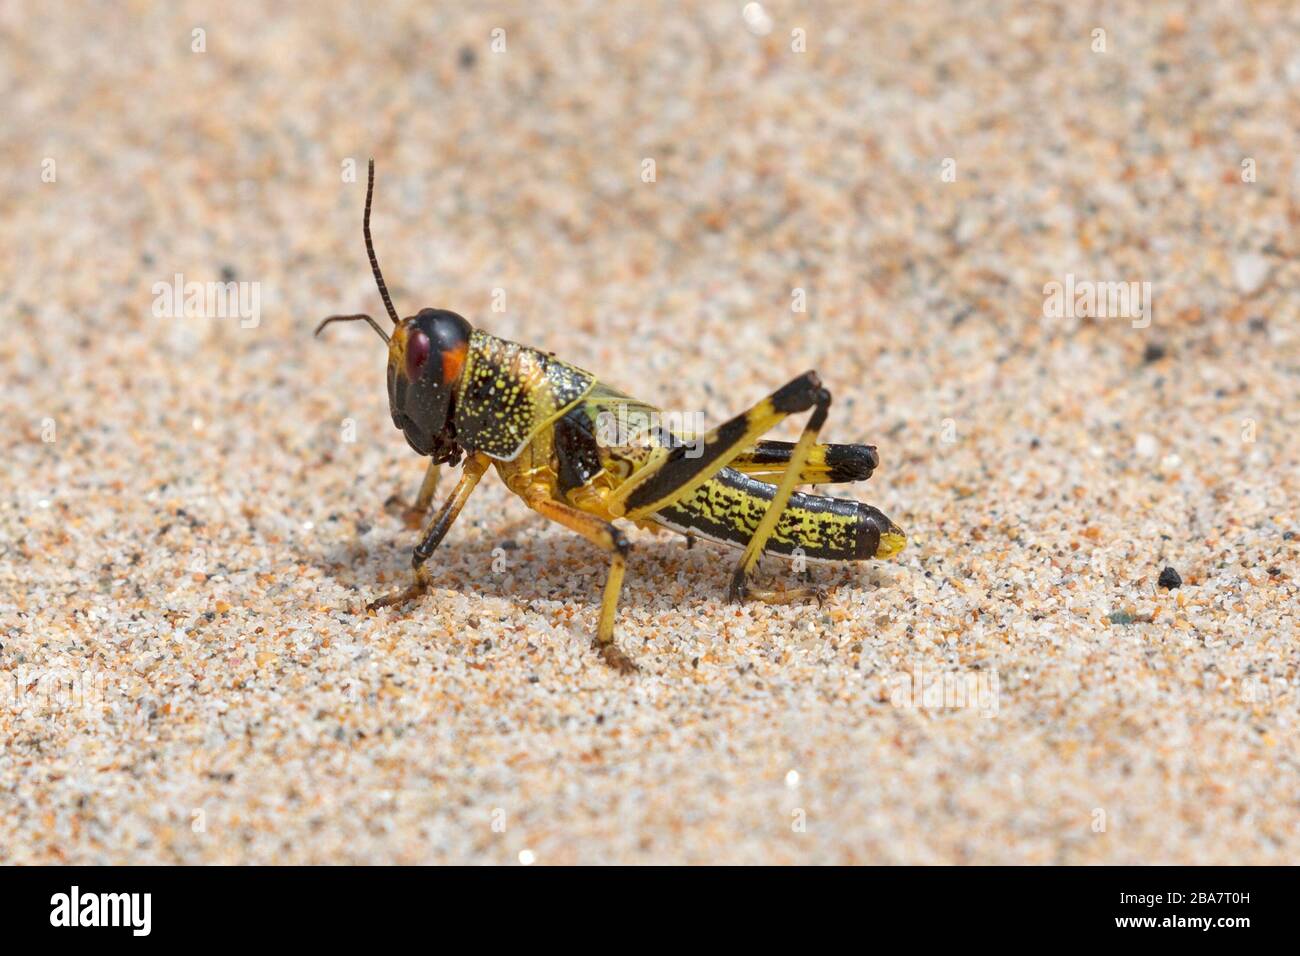 The Desert Locust, Schistocerca Gregaria. A juvenile young locust recently hatched in the North of Oman, in the Middle East. Noted for its swarming. Stock Photo